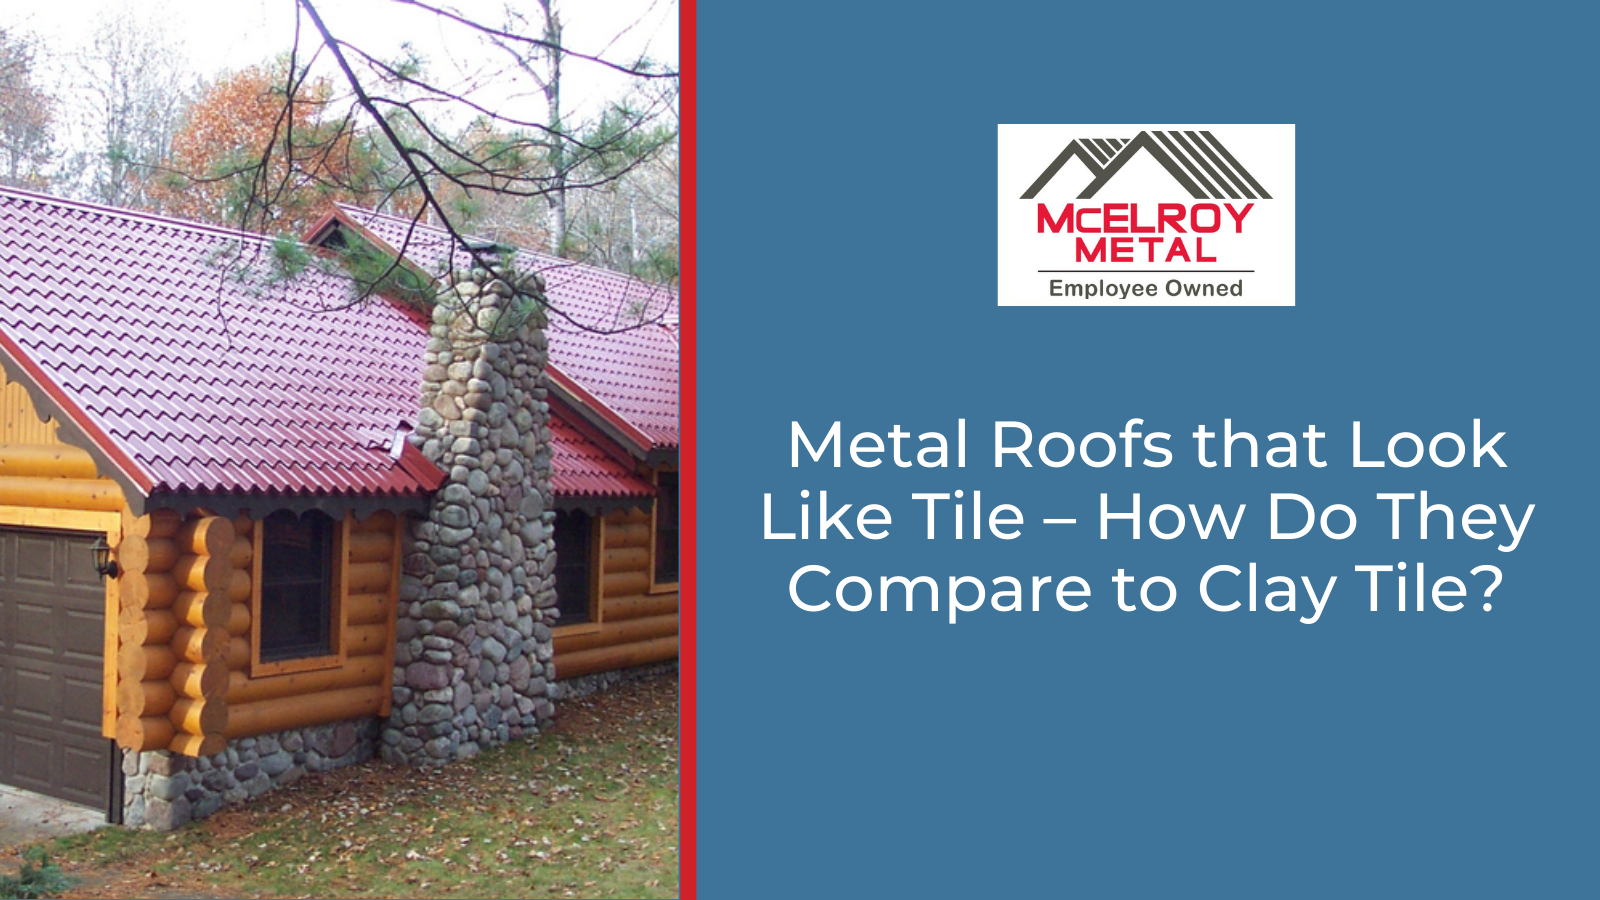 Metal Roofs that Look Like Tile – How Do They Compare to Clay Tile?